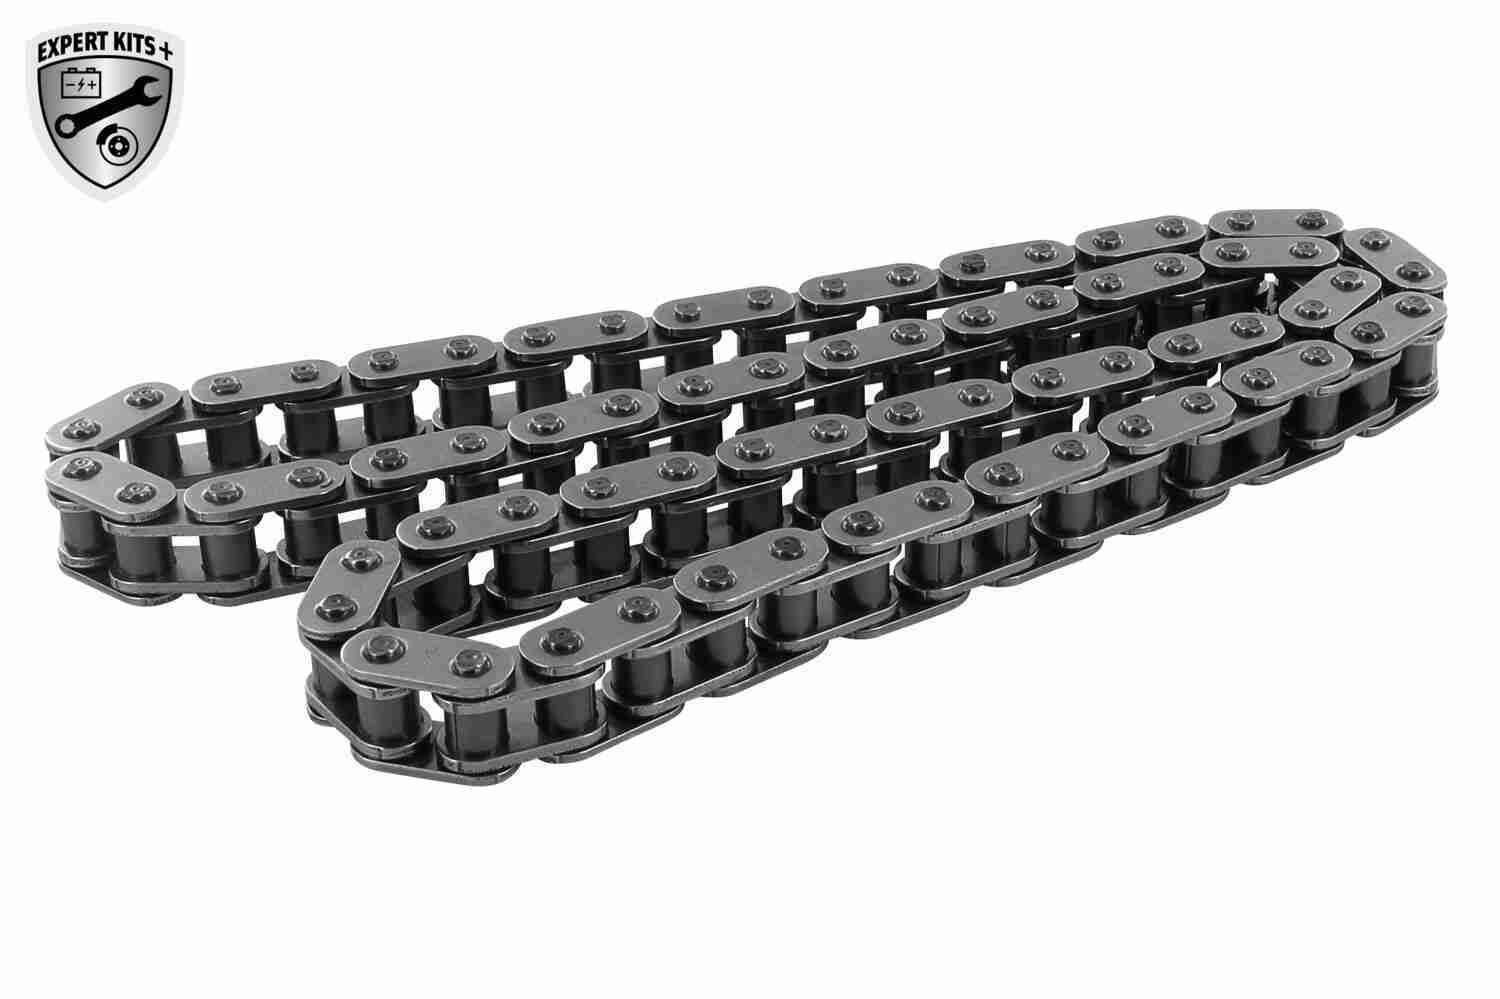 VAV10-0144 - 03H 109 4 VAICO Q+, original equipment manufacturer quality MADE IN GERMANY Timing Chain V10-0144 buy